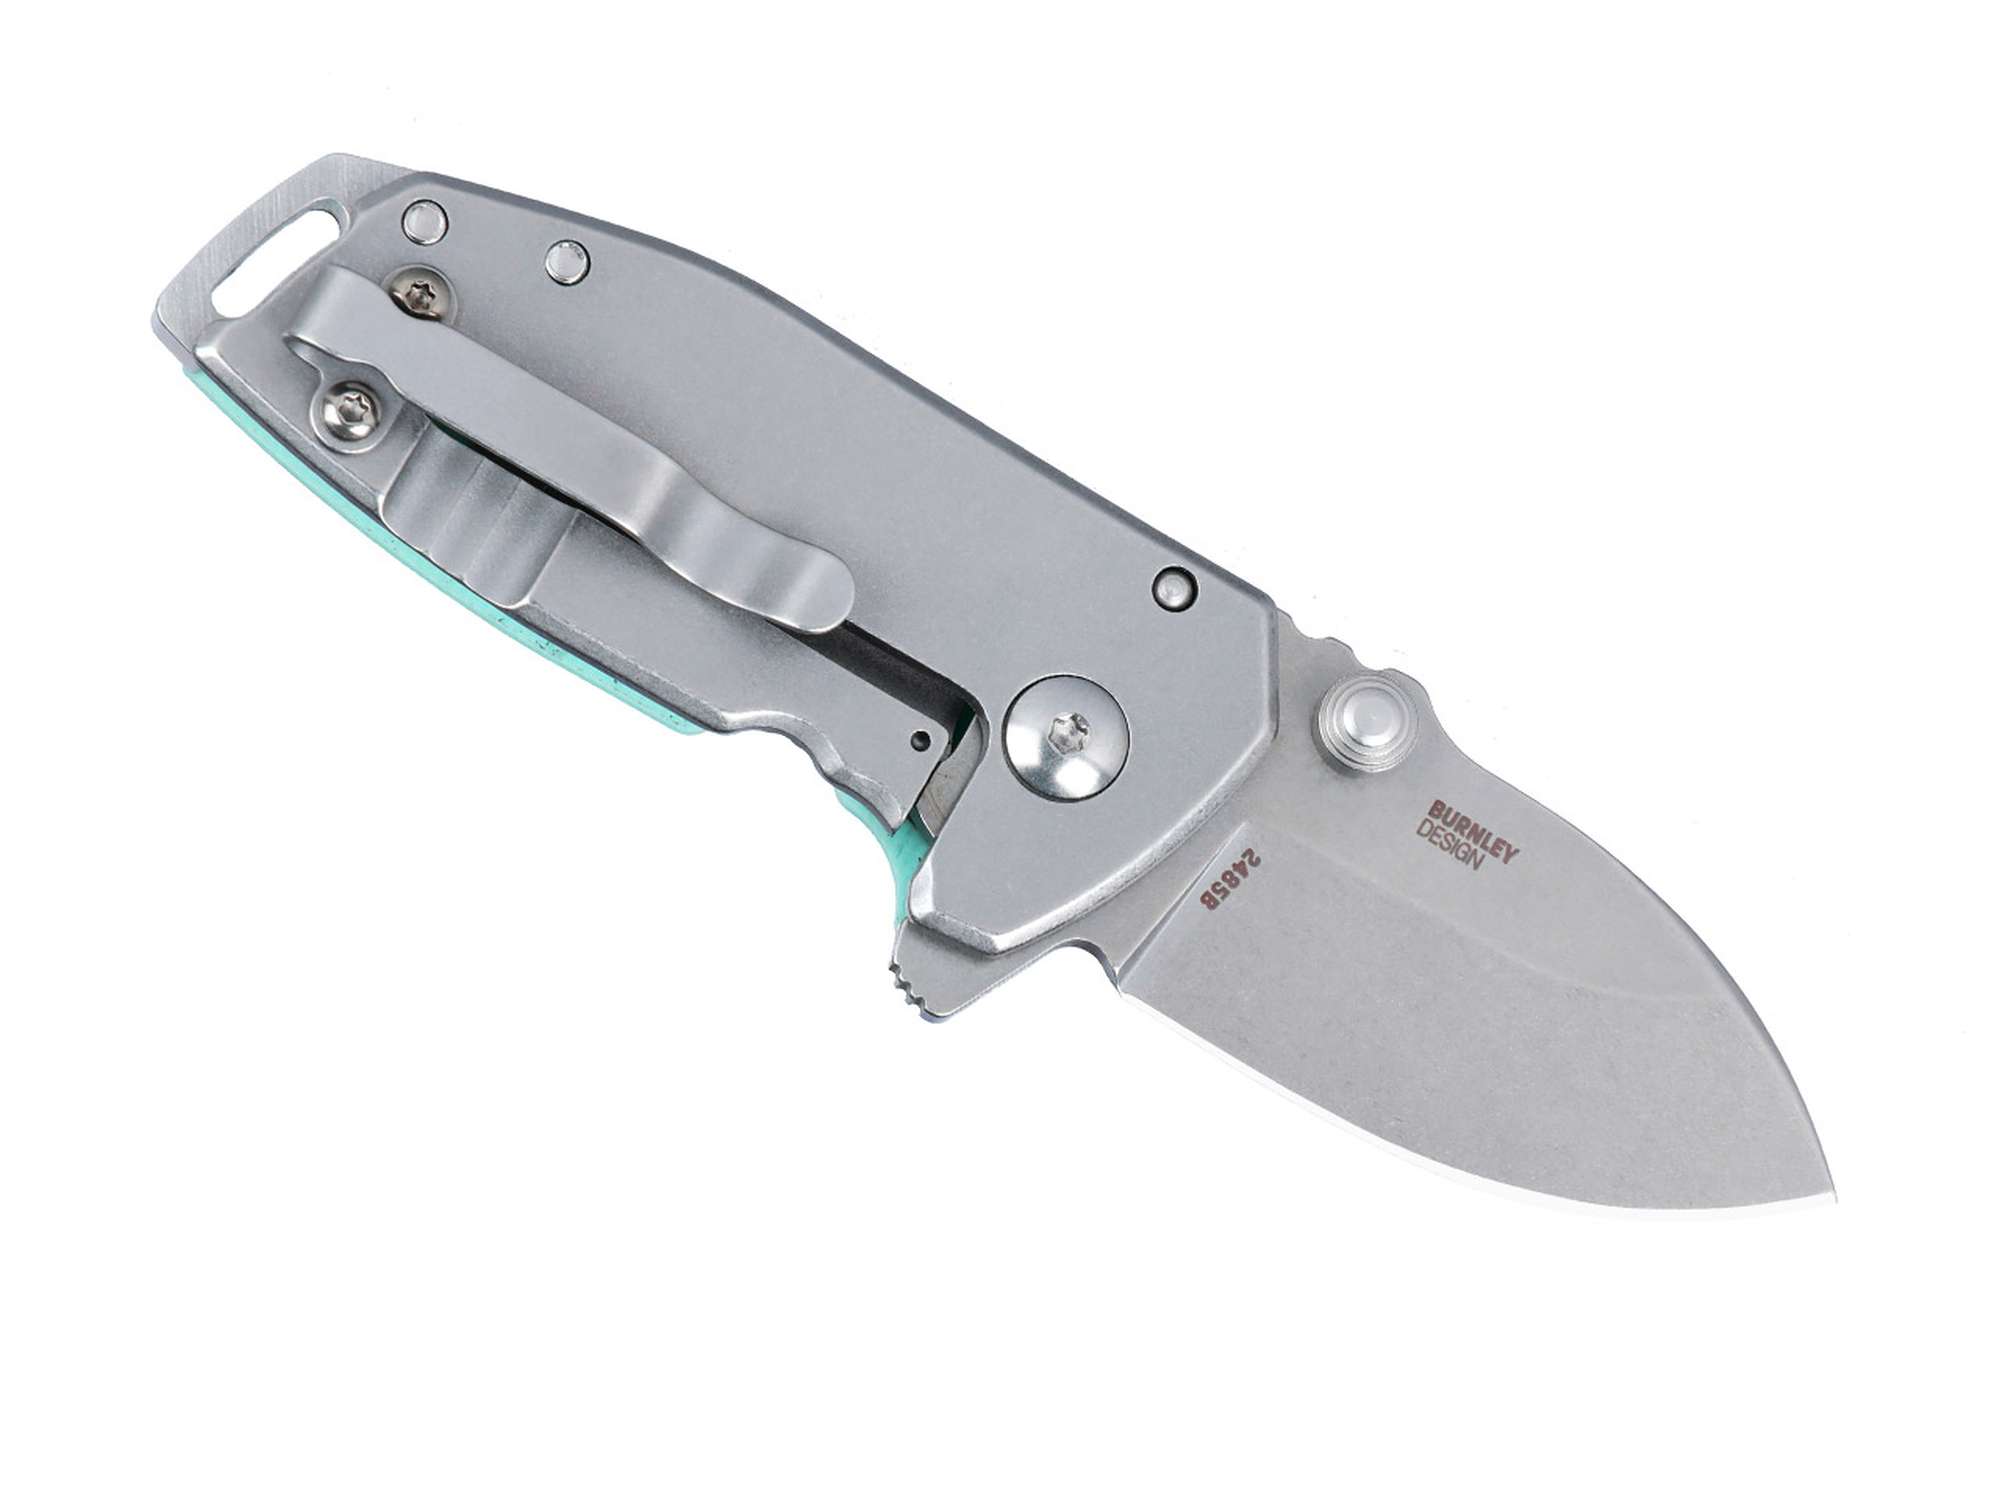 Squid Compact G10 Skyblue